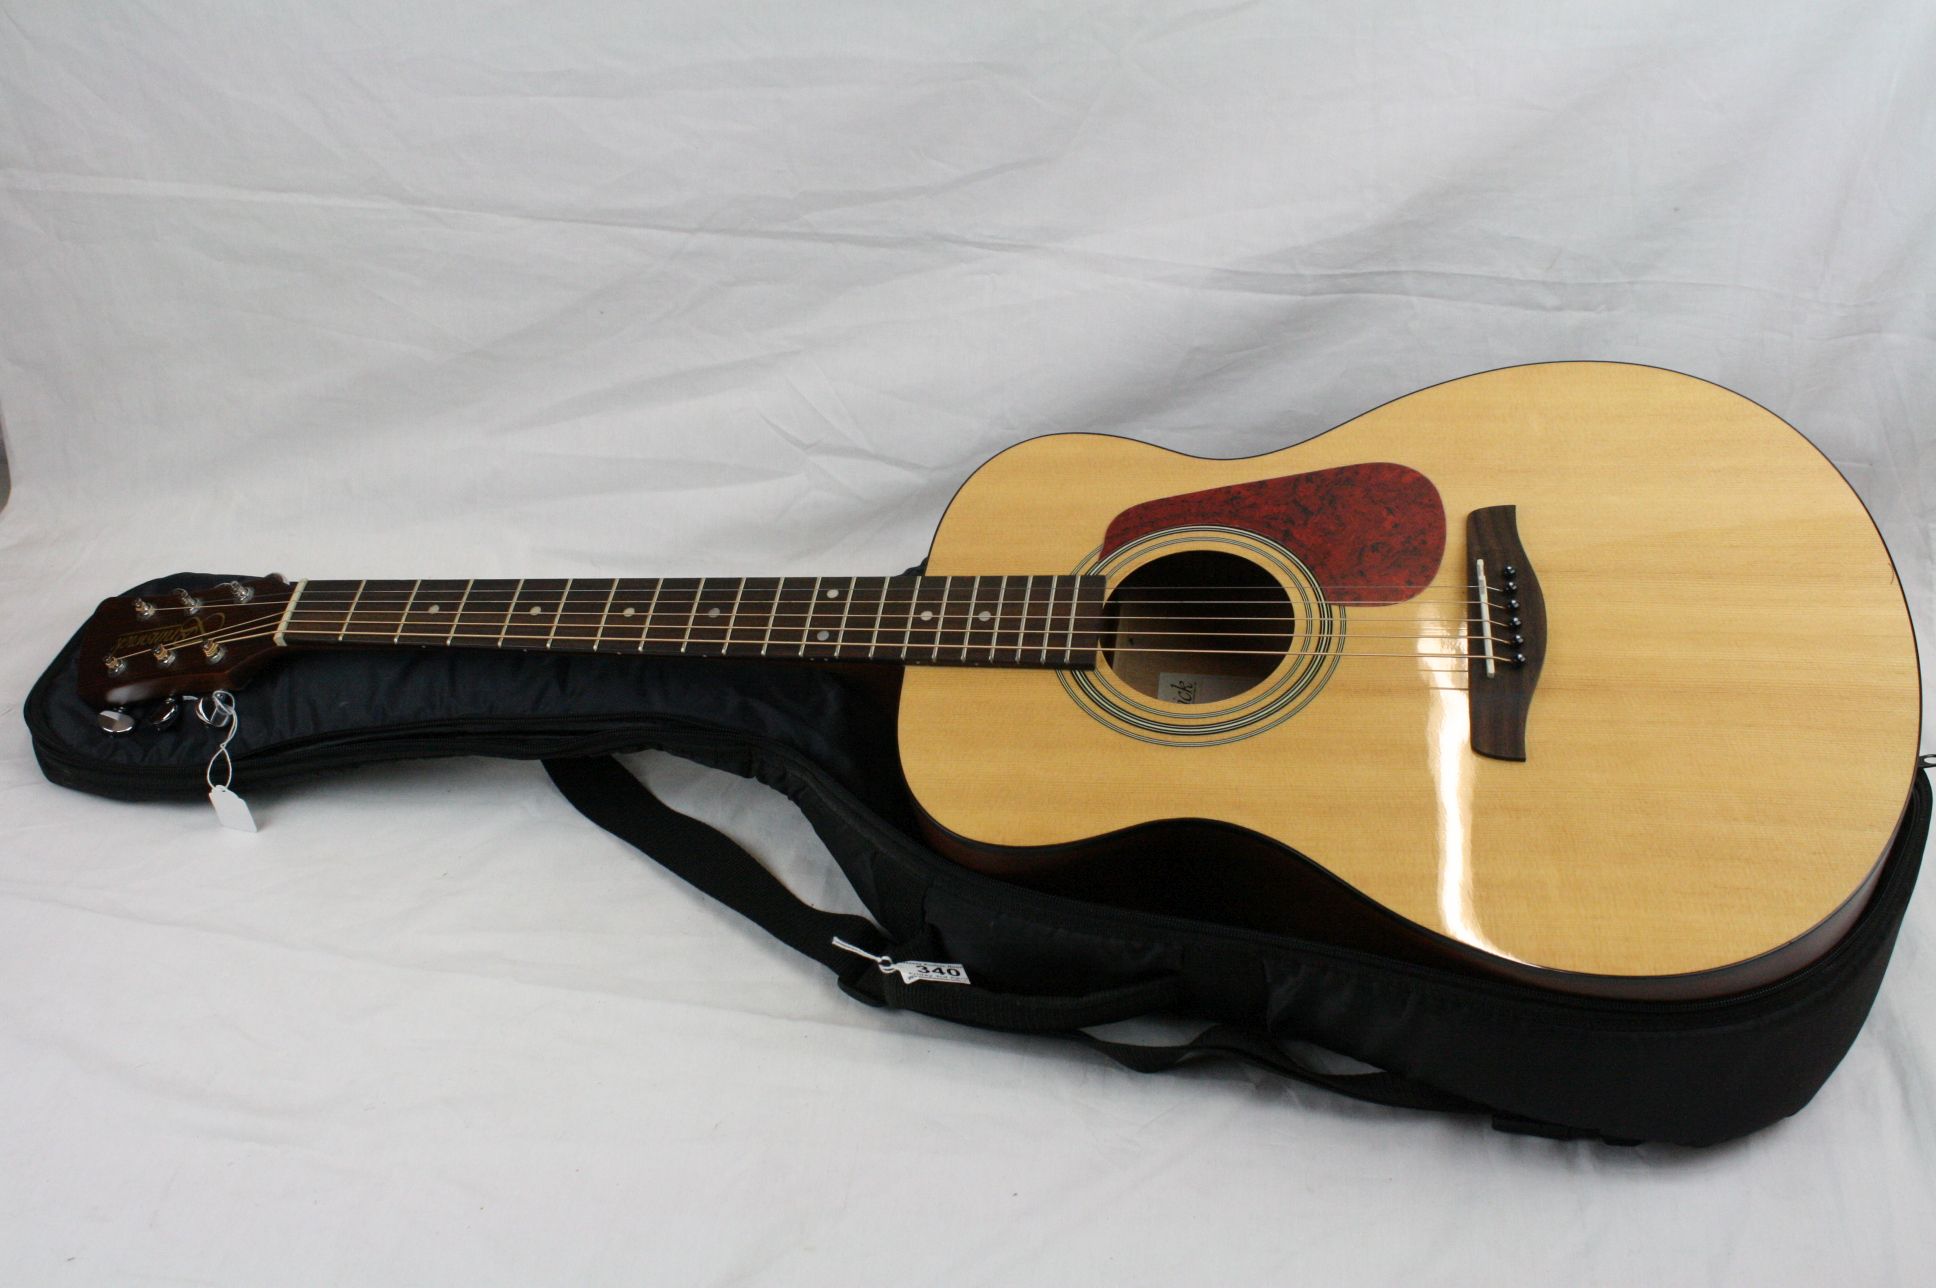 Guitar - A Brunswick BF200 acoustic guitar in natural finish, along with a gig bag. Good condition.